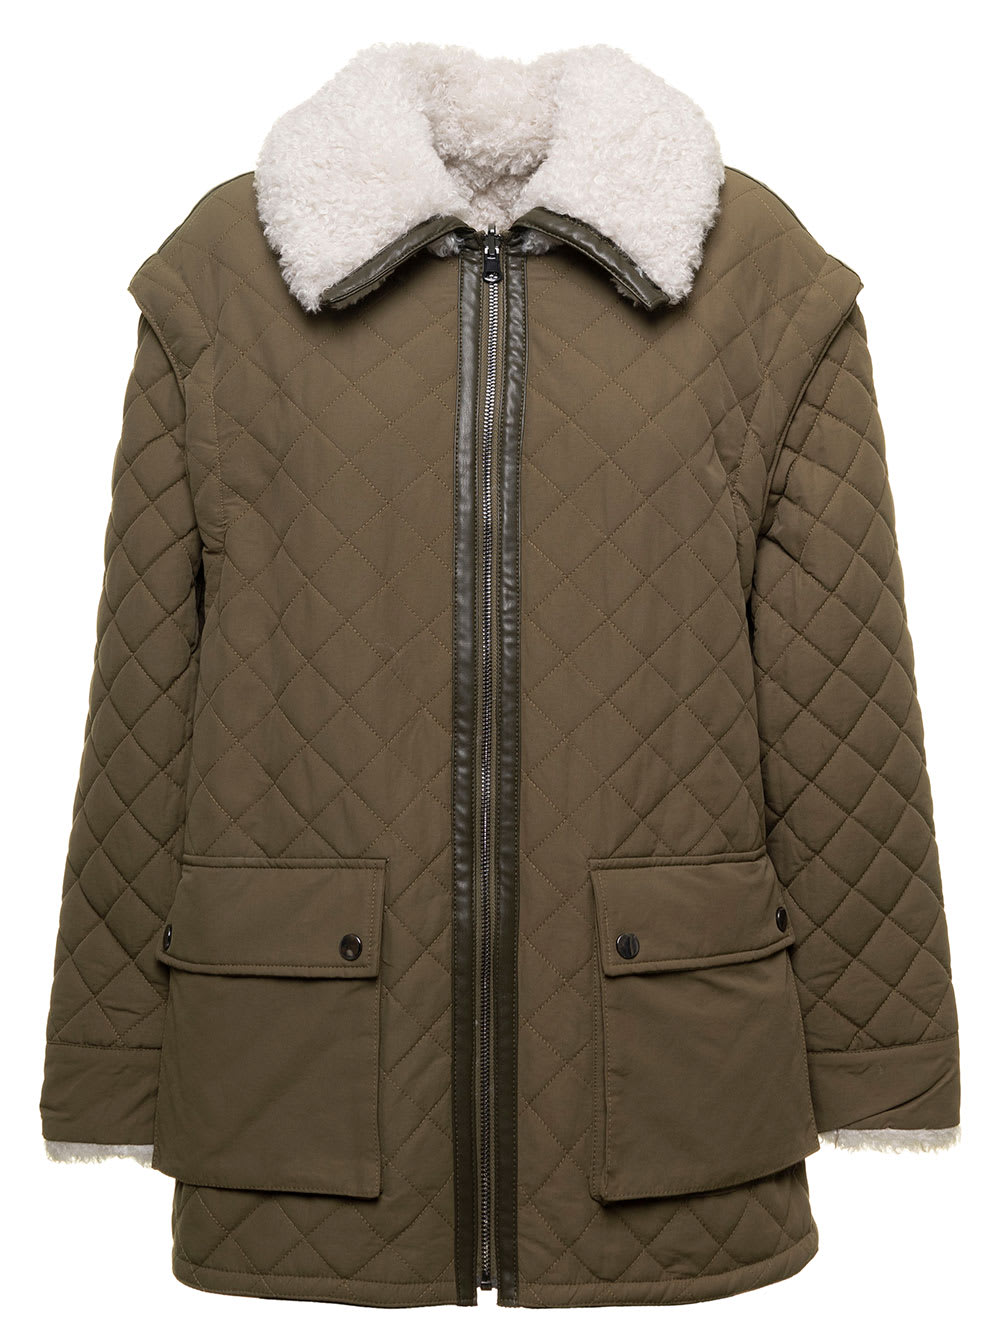 URBANCODE DOVE GRAY REVERSIBLE QUILTED PUFFER JACKET WOMAN URBANCODE